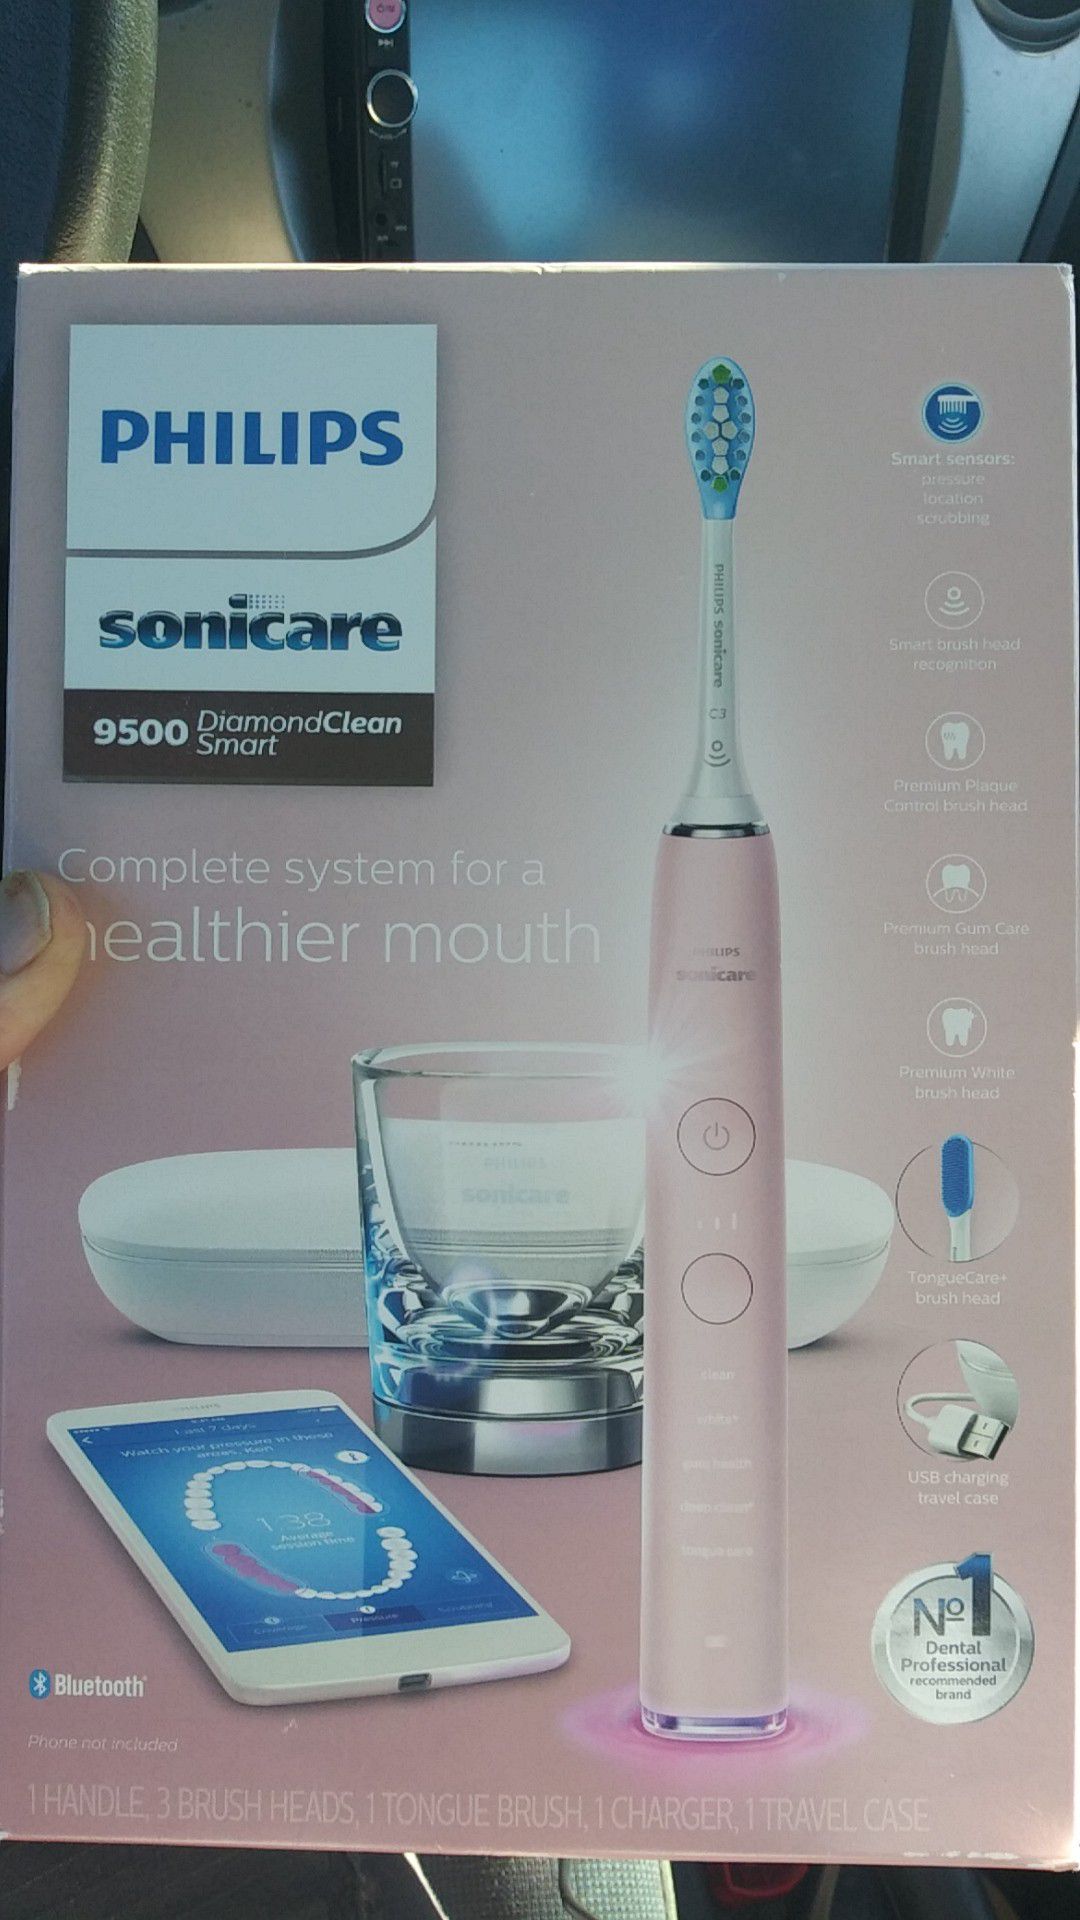 Philips sonic care 9500 pink